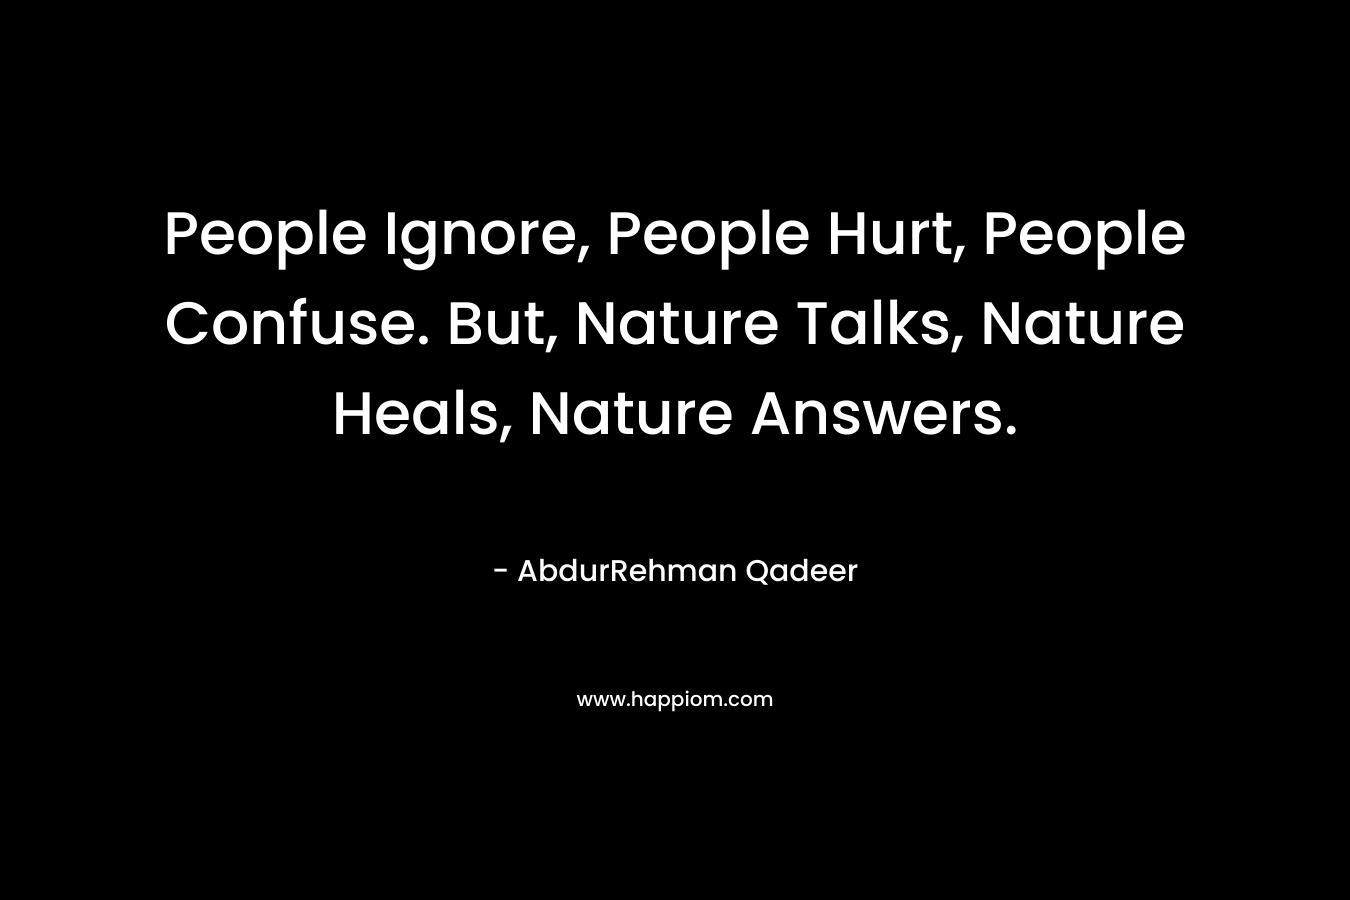 People Ignore, People Hurt, People Confuse. But, Nature Talks, Nature Heals, Nature Answers.